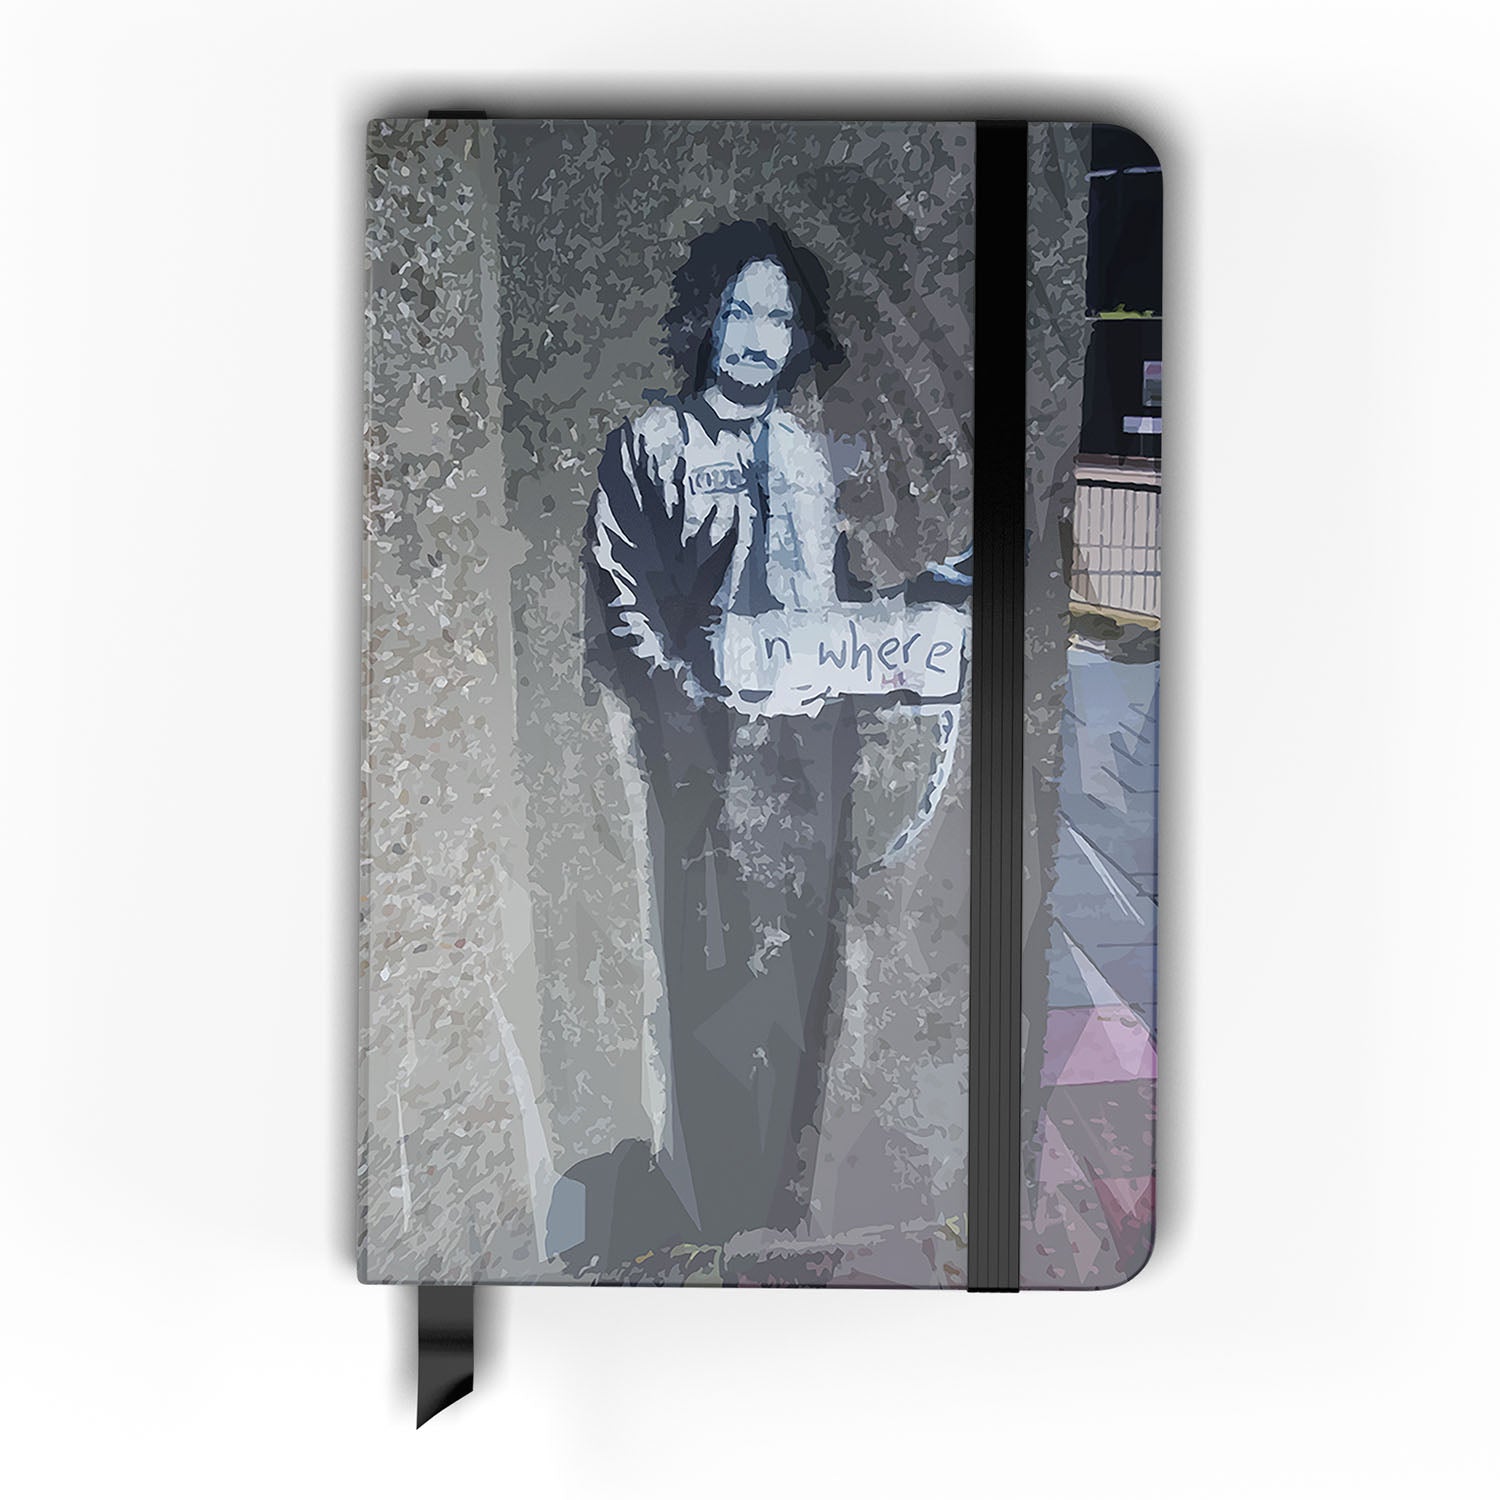 Banksy Hitchhiker To Anywhere 4 Split Panel Canvas - Canvas Art Rocks - 1